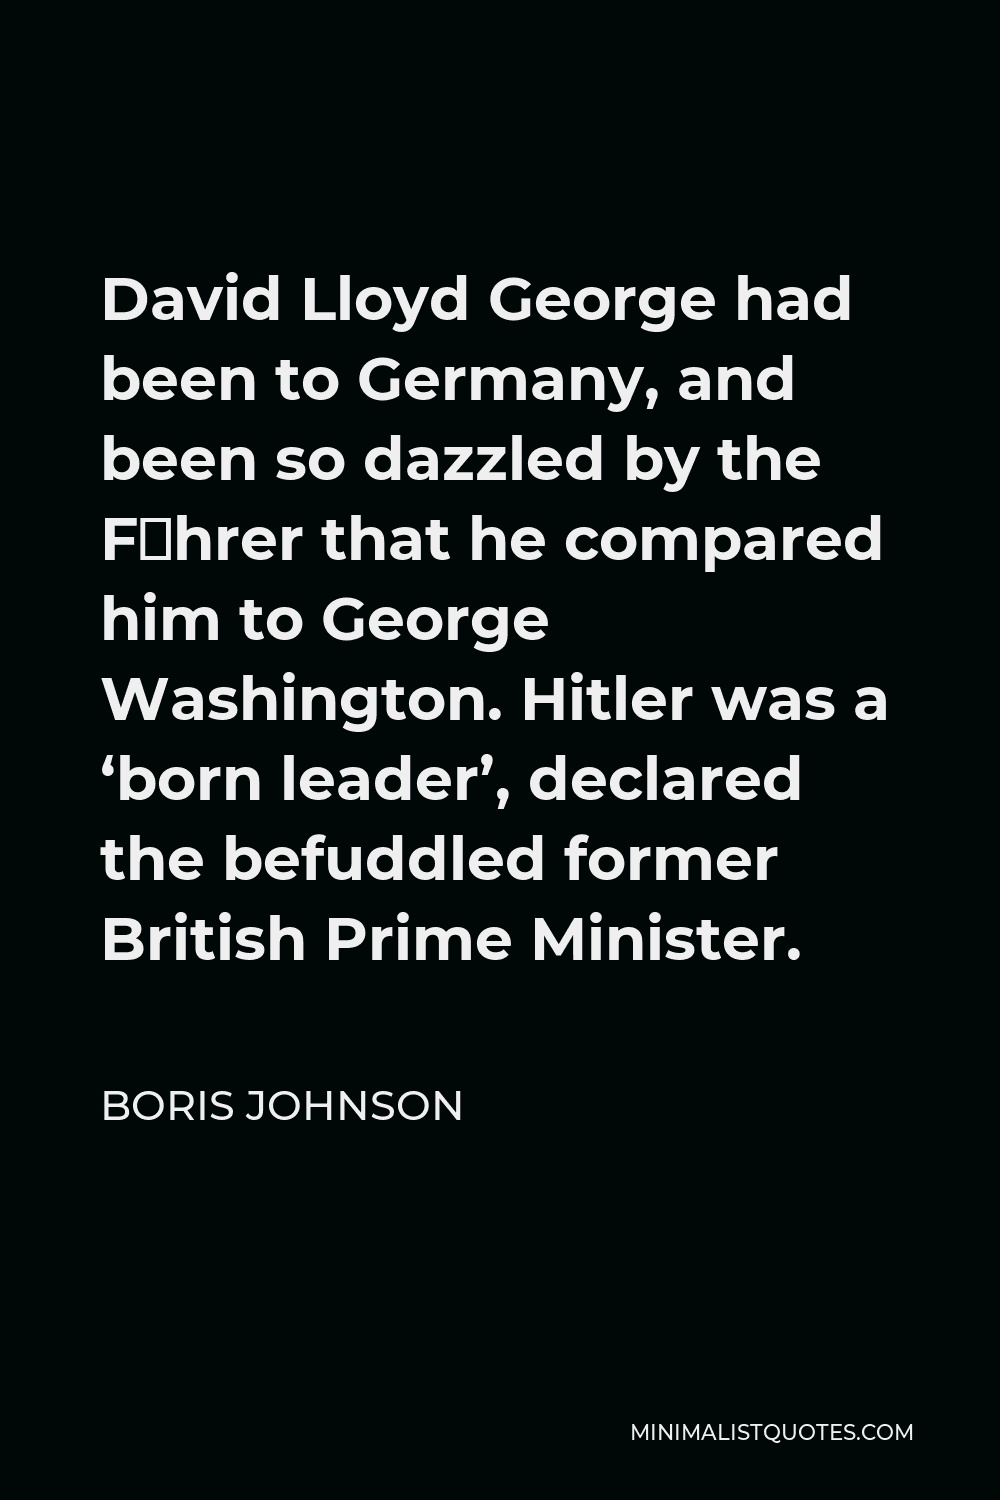 Boris Johnson Quote - David Lloyd George had been to Germany, and been so dazzled by the Führer that he compared him to George Washington. Hitler was a ‘born leader’, declared the befuddled former British Prime Minister.